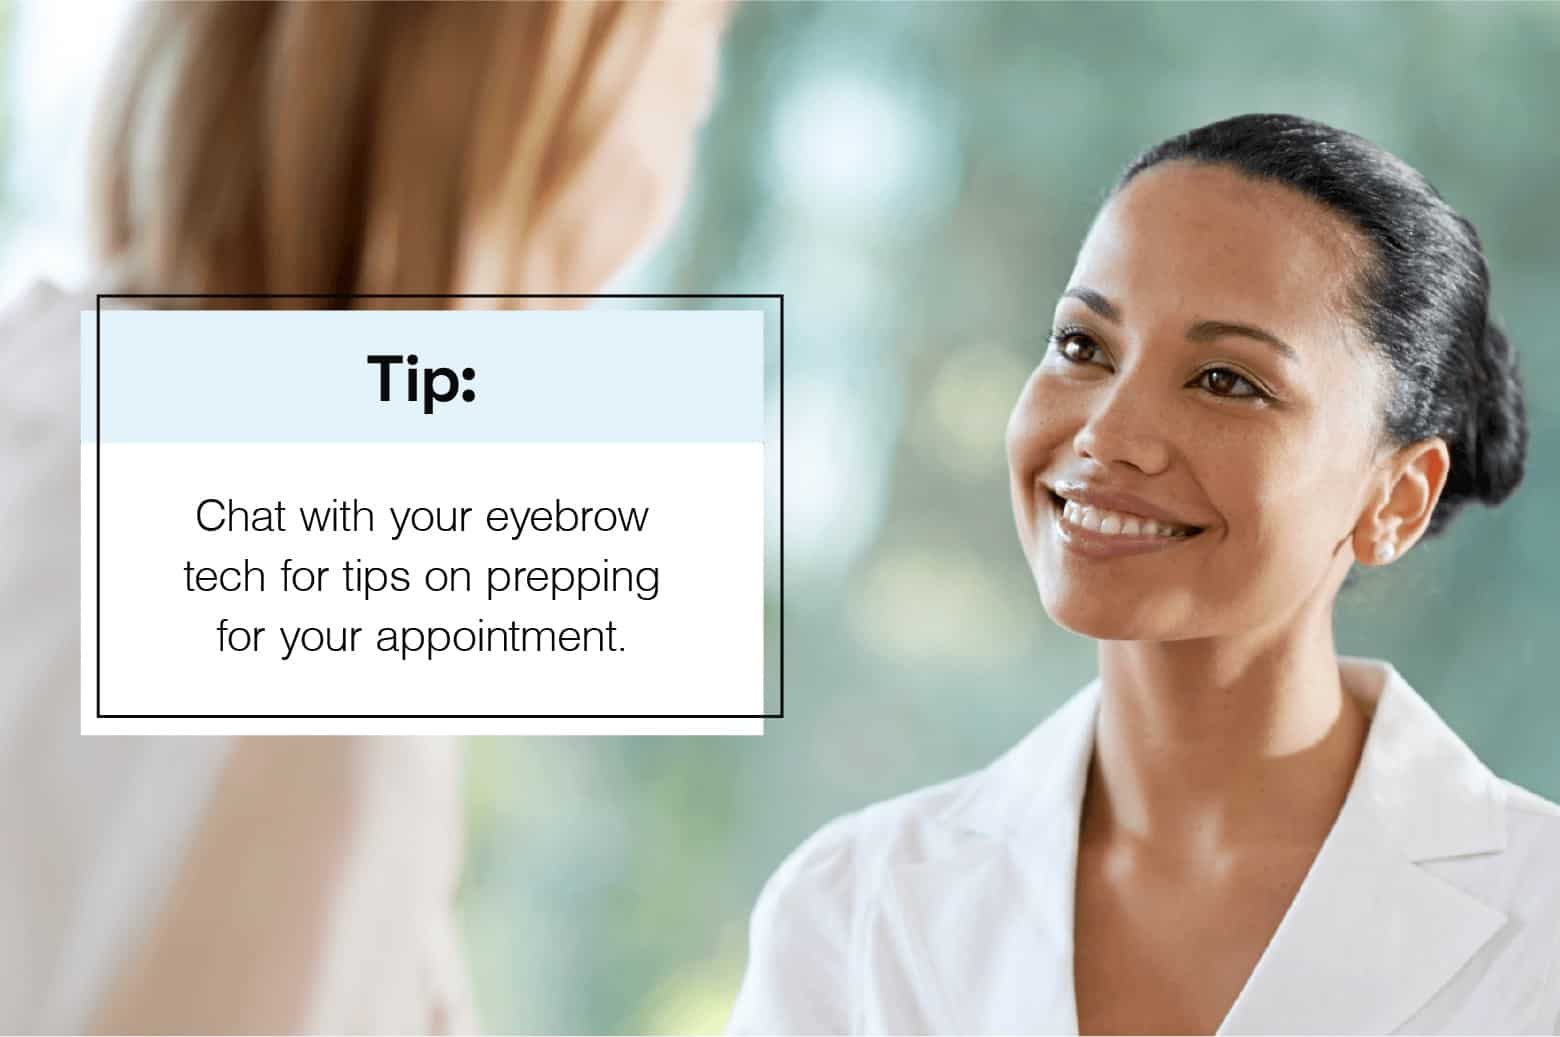 tip chat with your eyebrow tech for tips on prepping for your appointment